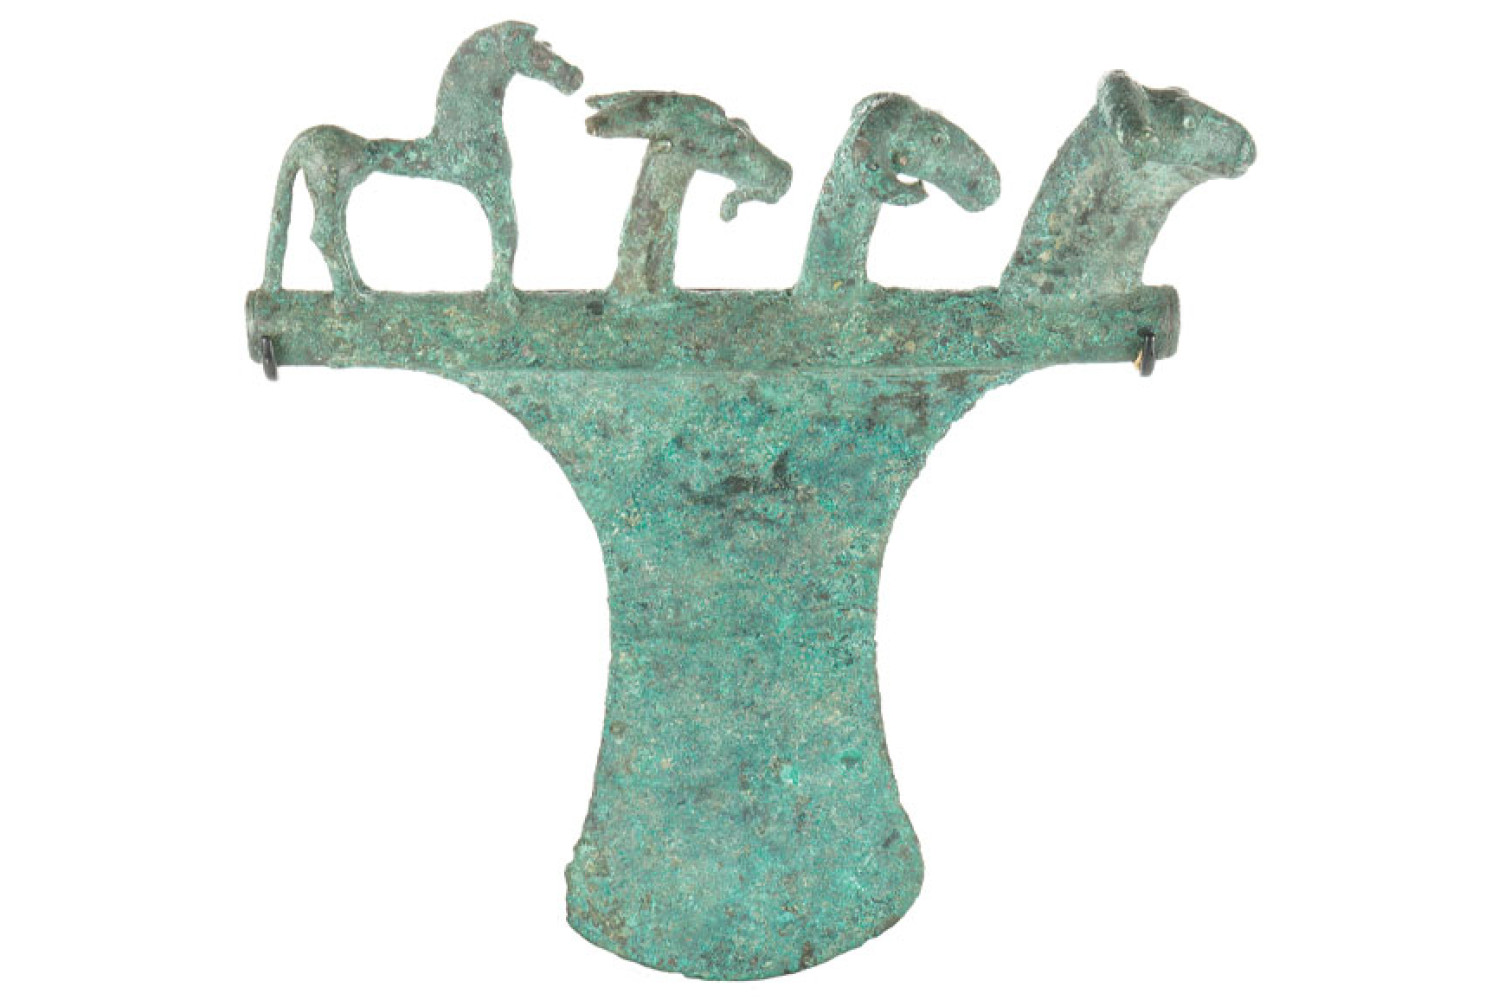 Greek (Macedonia), Axe Head with Horse Statuette and Goat, Ram and Bull Protomes, Eighth century B.C., Bronze, The Sol Rabin Collection 